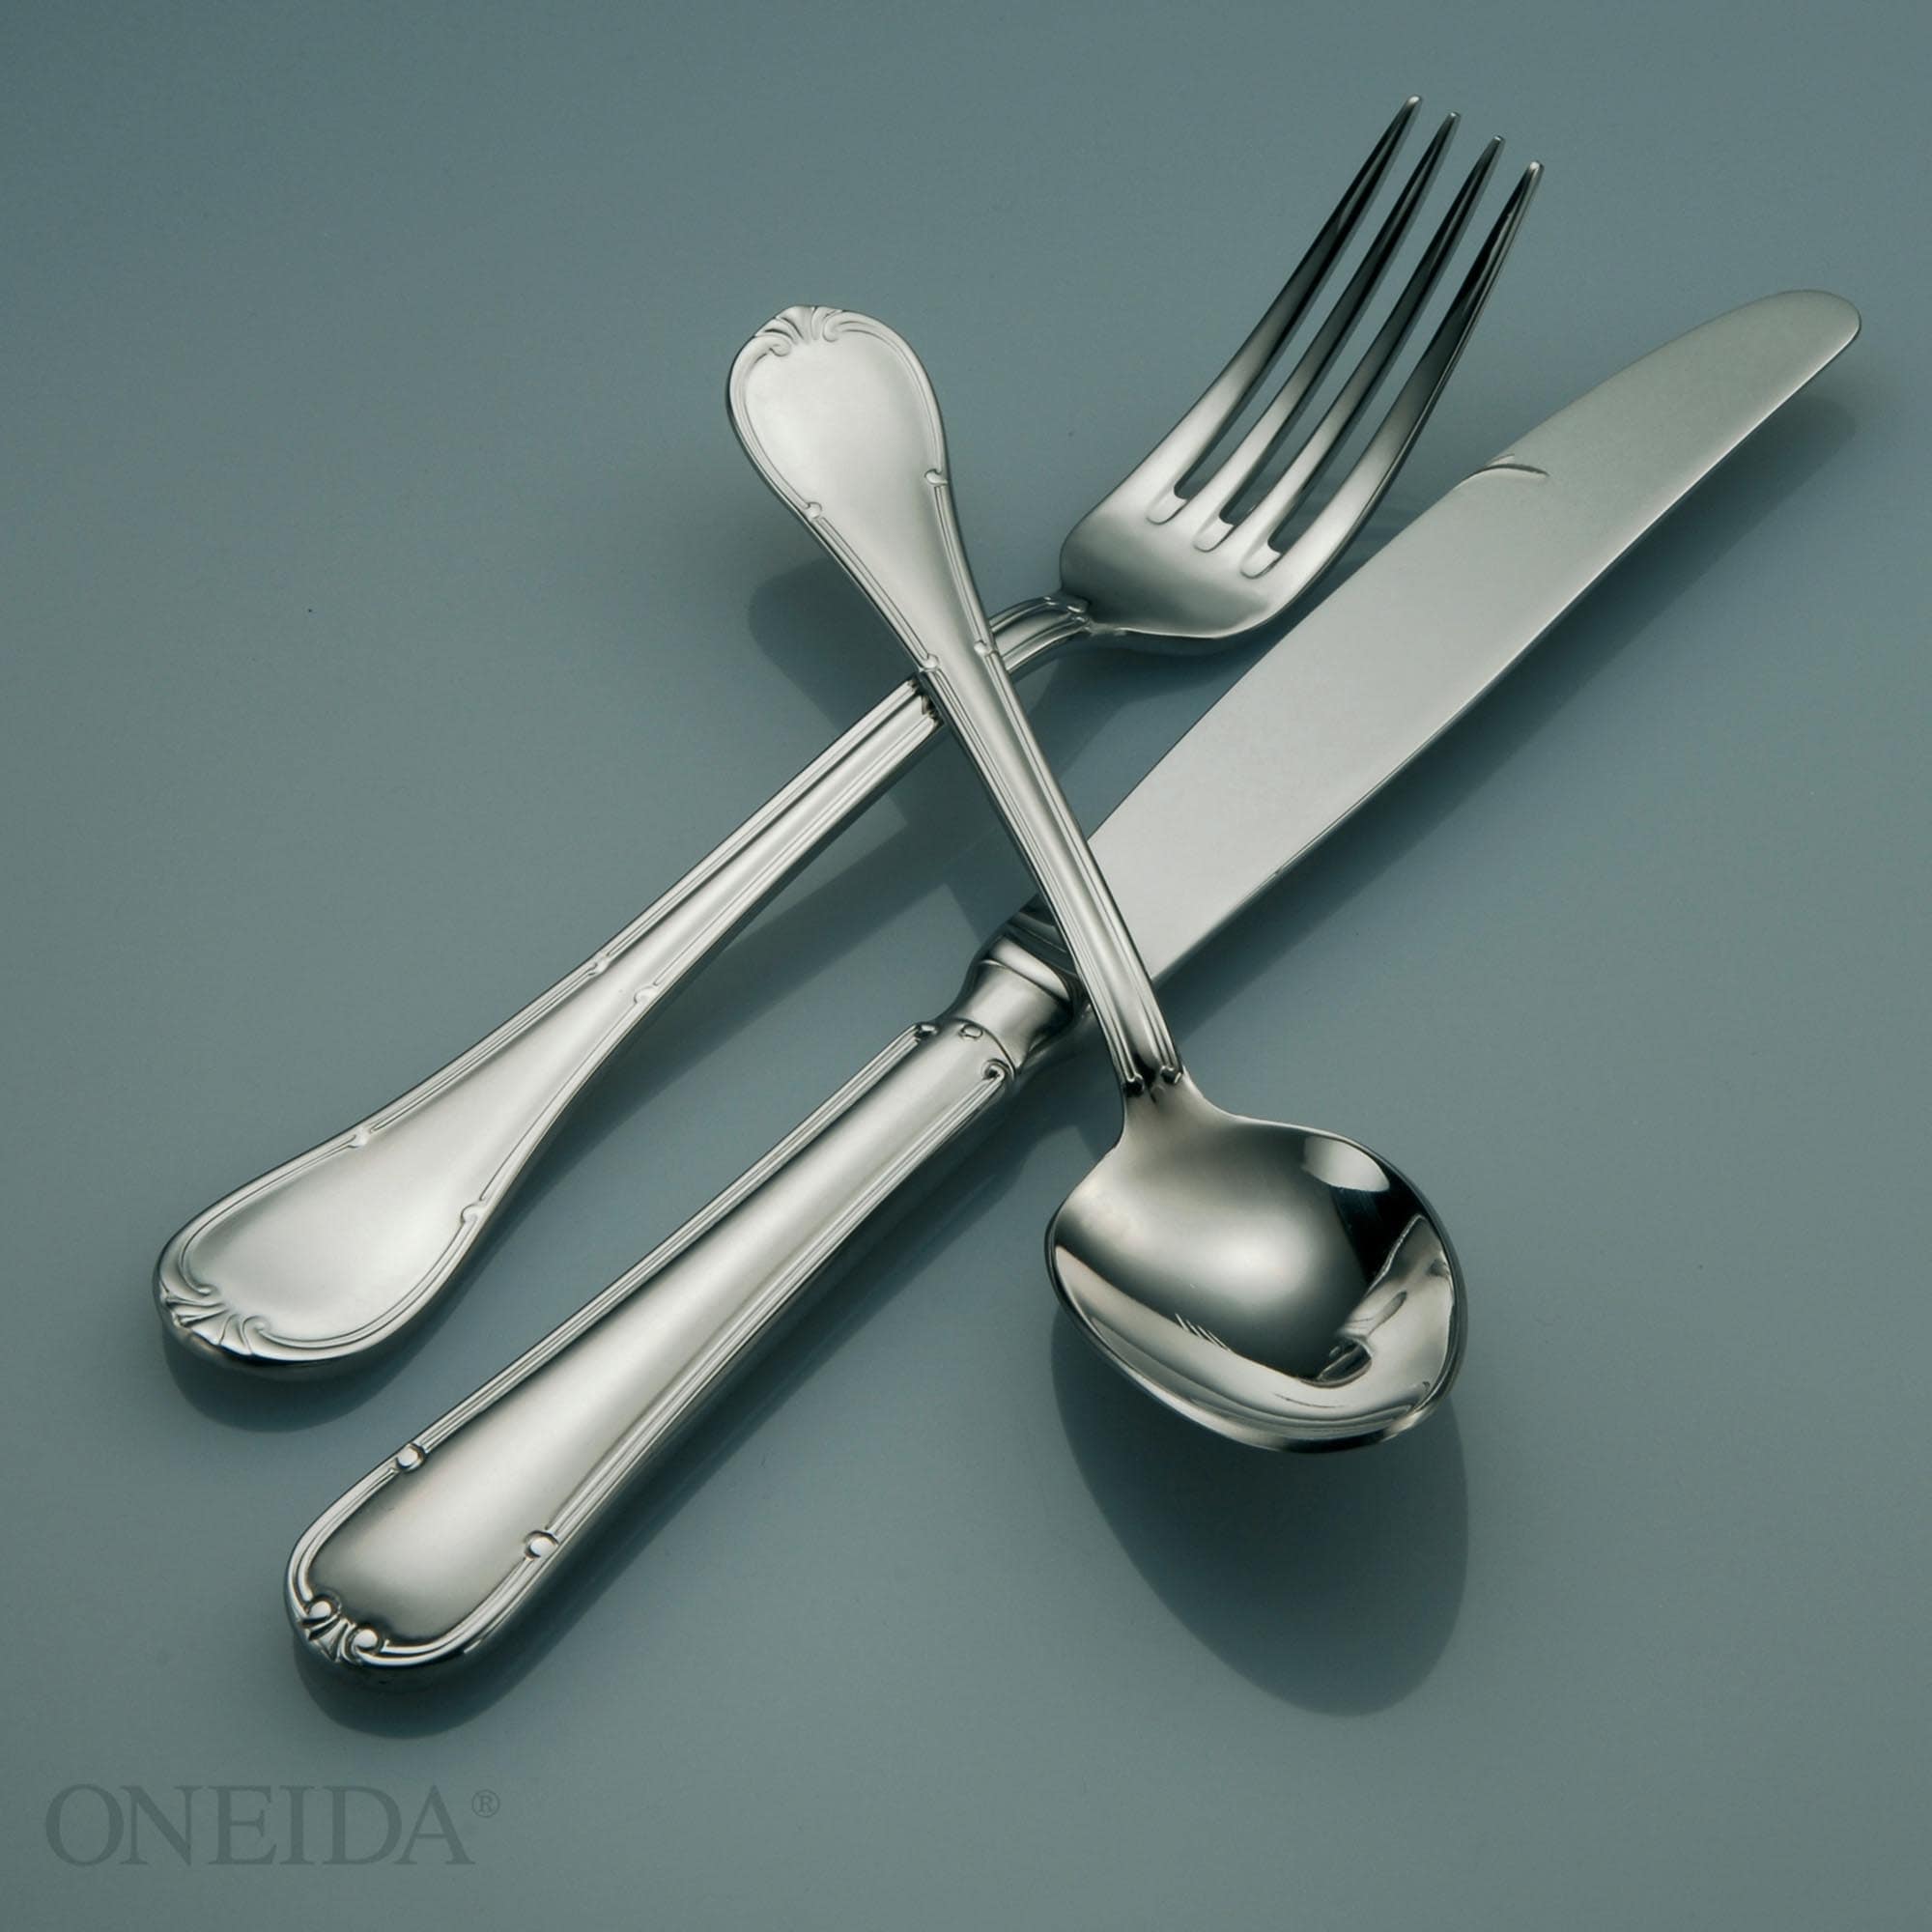 https://ak1.ostkcdn.com/images/products/is/images/direct/4a6e4c6232774dd9d8d4a0392b4fef3412c90854/Oneida-18-0-Stainless-Steel-Titian-Tablespoon-Serving-Spoons-%28Set-of-12%29.jpg